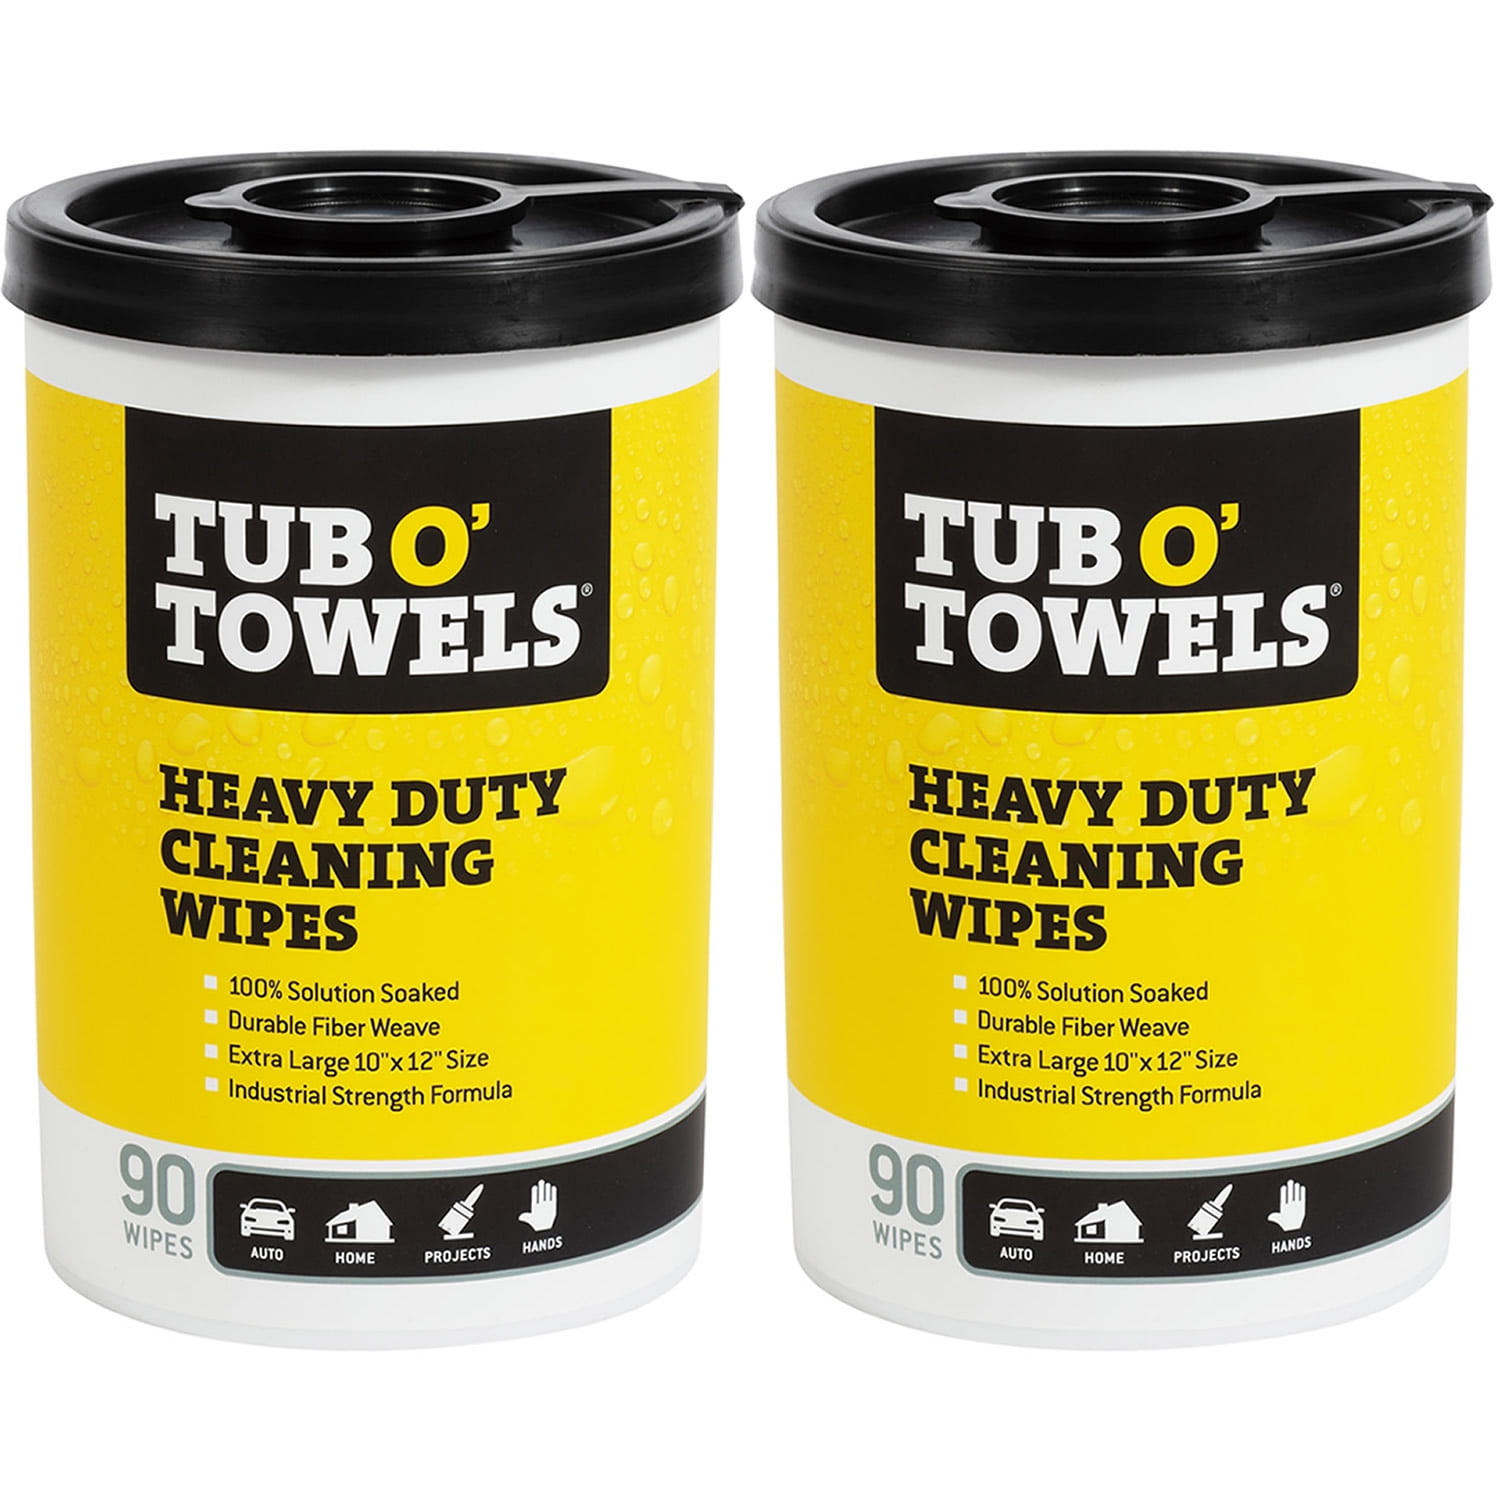 Tub O Towels TW90 Multi-Surface Cleaning Wipes for sale online 